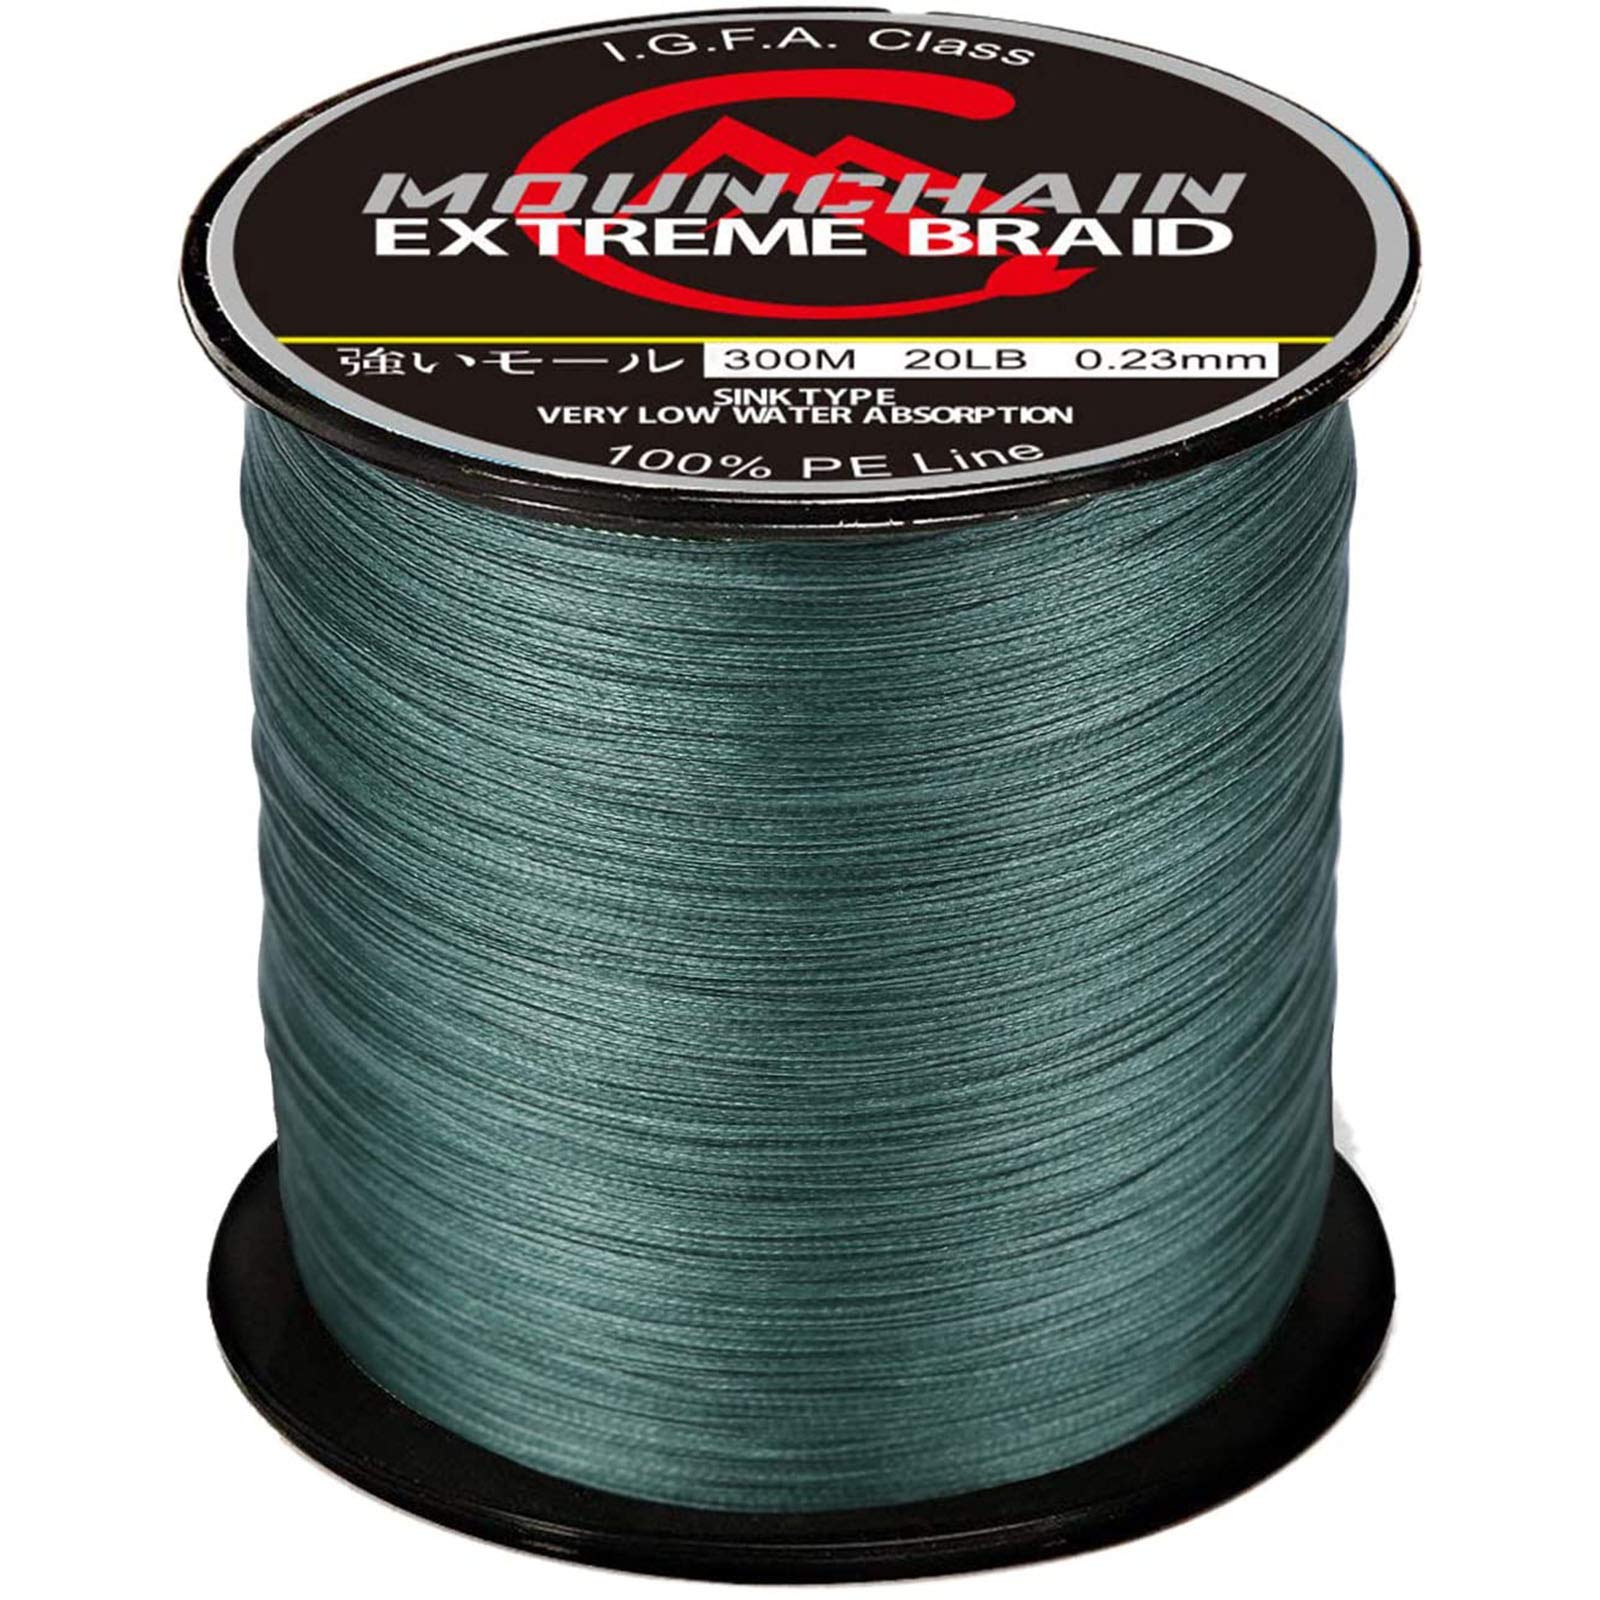 Mounchain Braided Fishing Line, 4 or 8 Strands Abrasion Resistant Braided  Lines Super Strong 100% PE Sensitive Fishing Line 300M / 500M / 1000M 8  Strands- 30LB - 328Yds Dark Green, braided fishing line